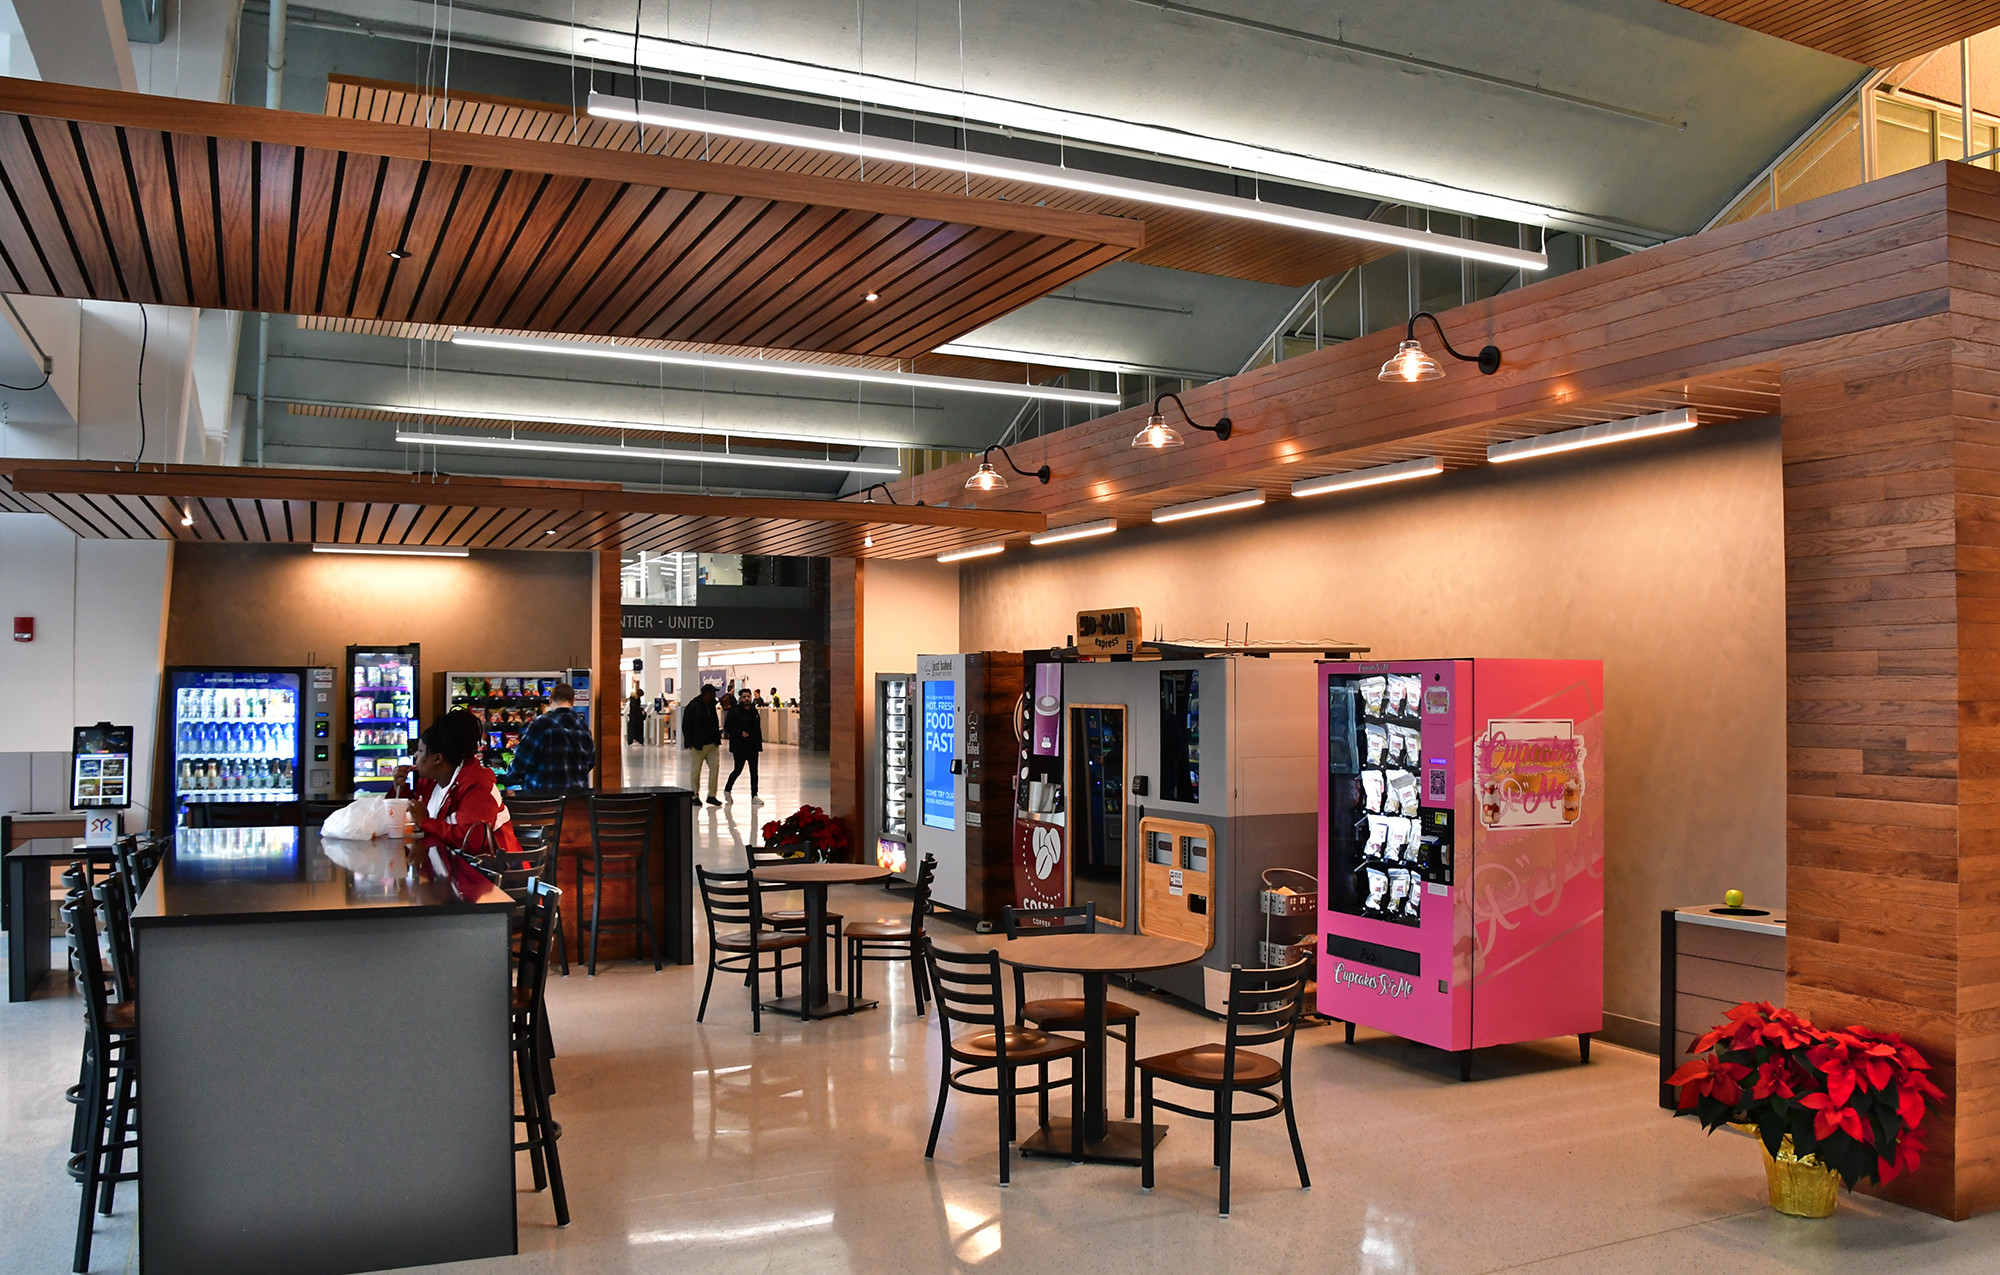 The brand-new automated retail lounge at the Syracuse airport.